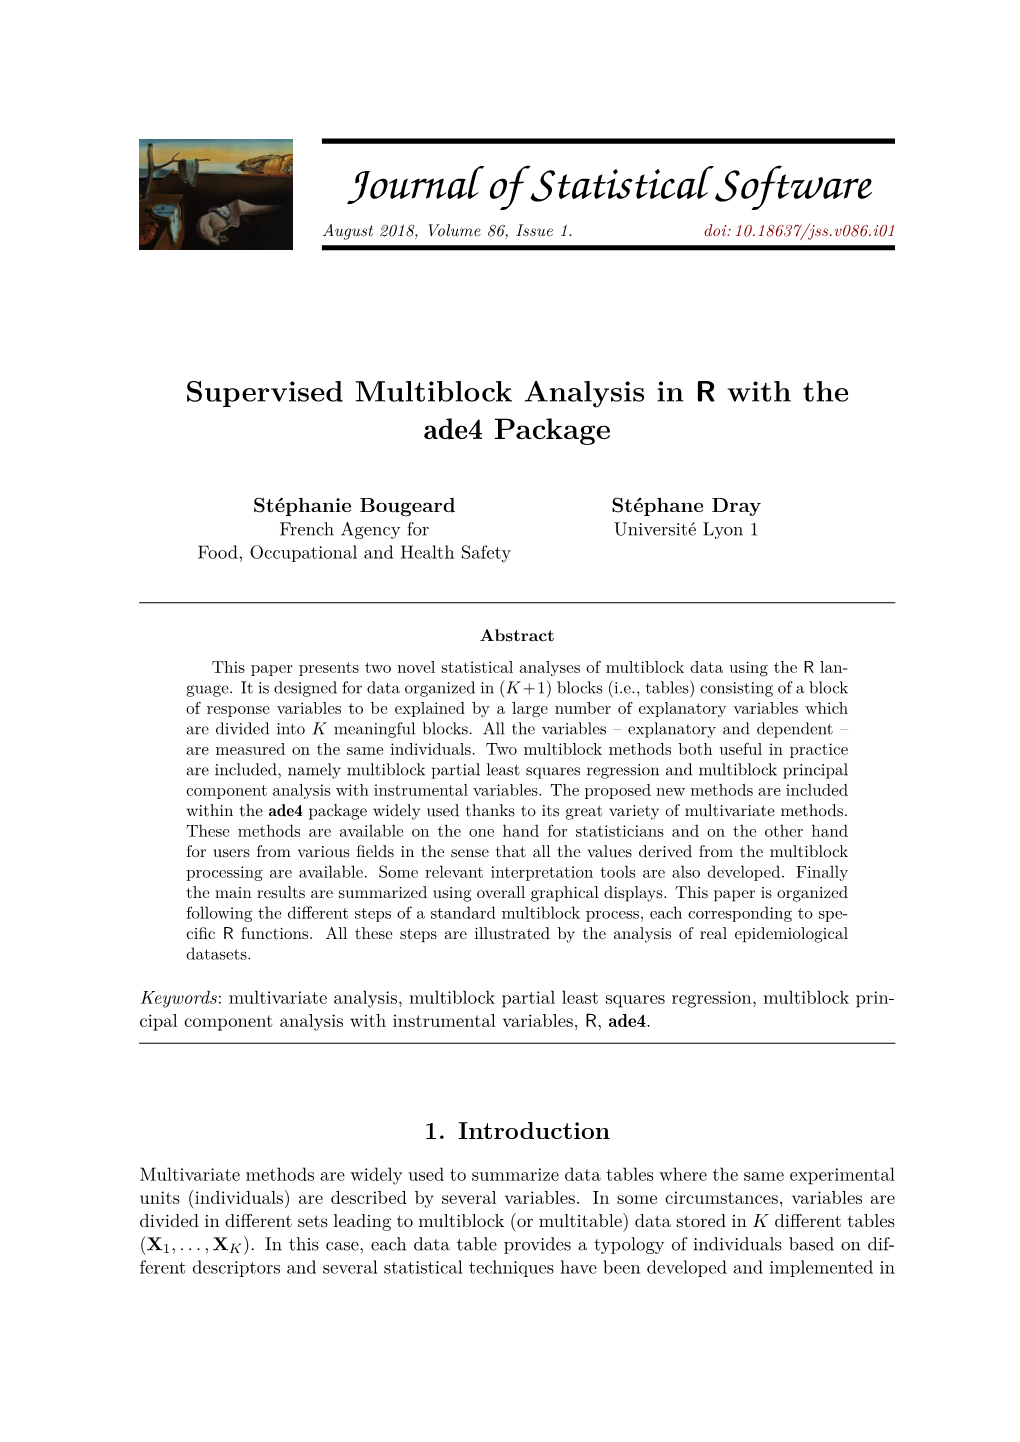 Supervised Multiblock Analysis in R with the Ade4 Package